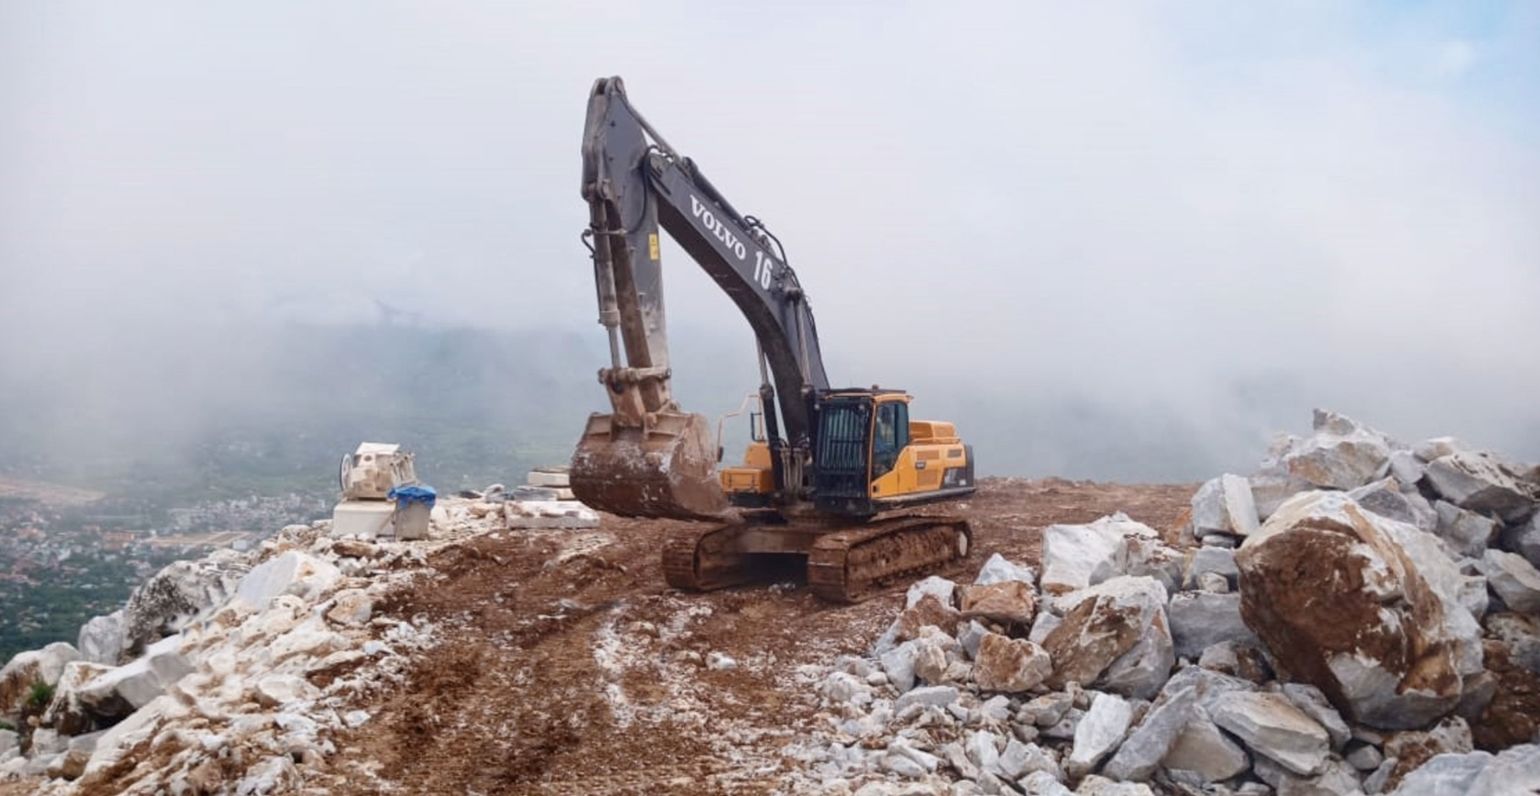  A EC480DL crawler excavator in operation at the Yen Bai Province marble quarry